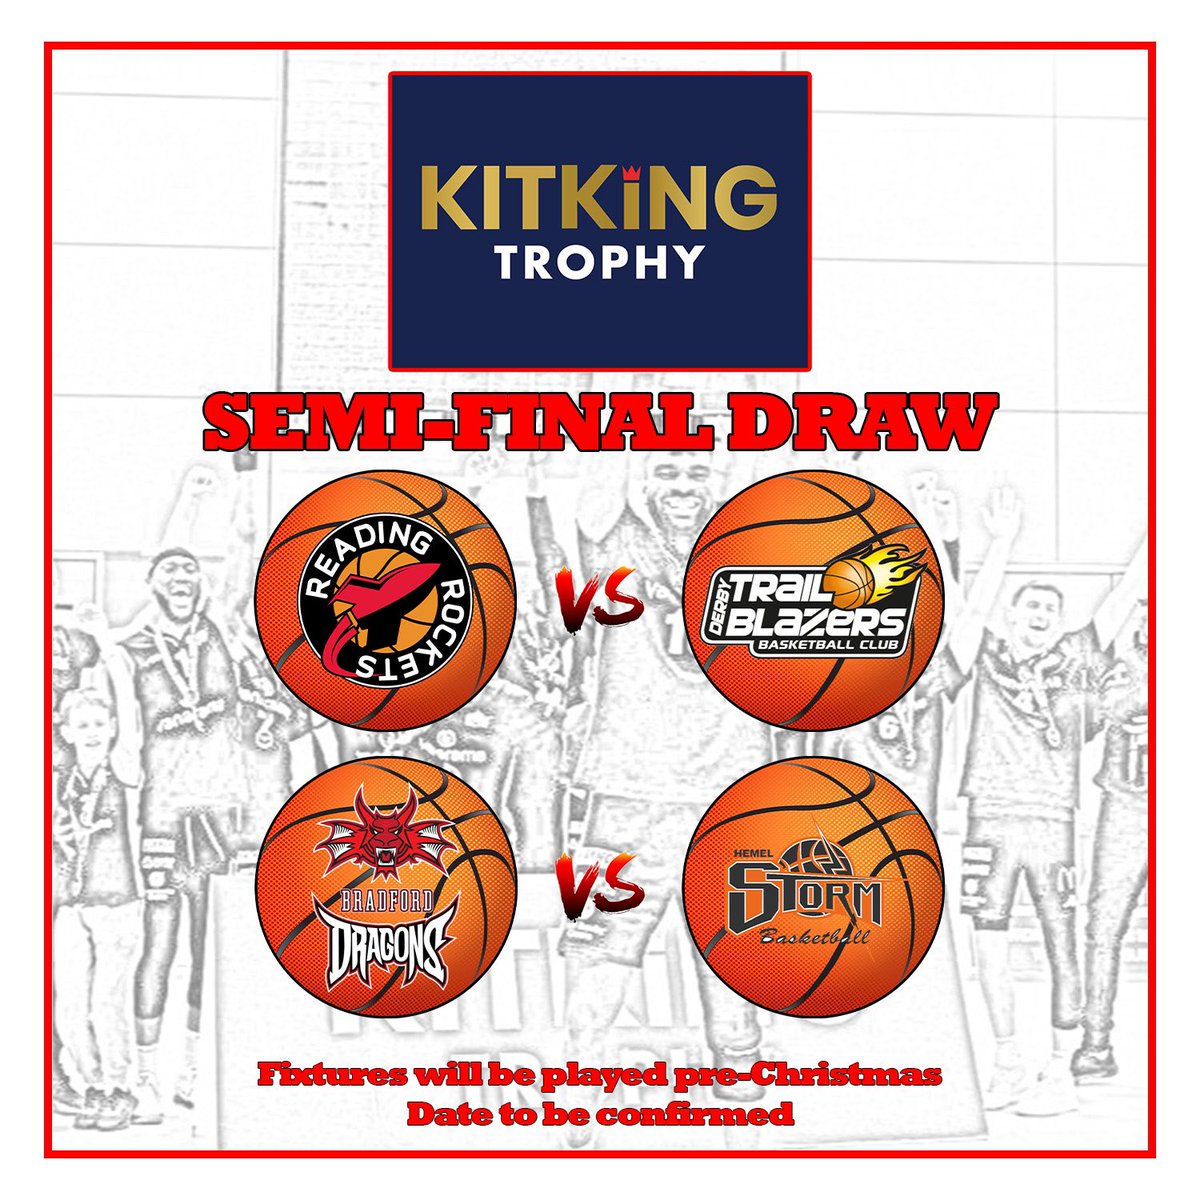 Bradford Dragons have been drawn at home against Hemel Storm in the semi finals of the KitKing Trophy. Reading Rockets will host Derby Trailblazers in the other semifinal fixture. #BradfordDragons #Basketball #OneClubOneFamily #kitkingtrophy